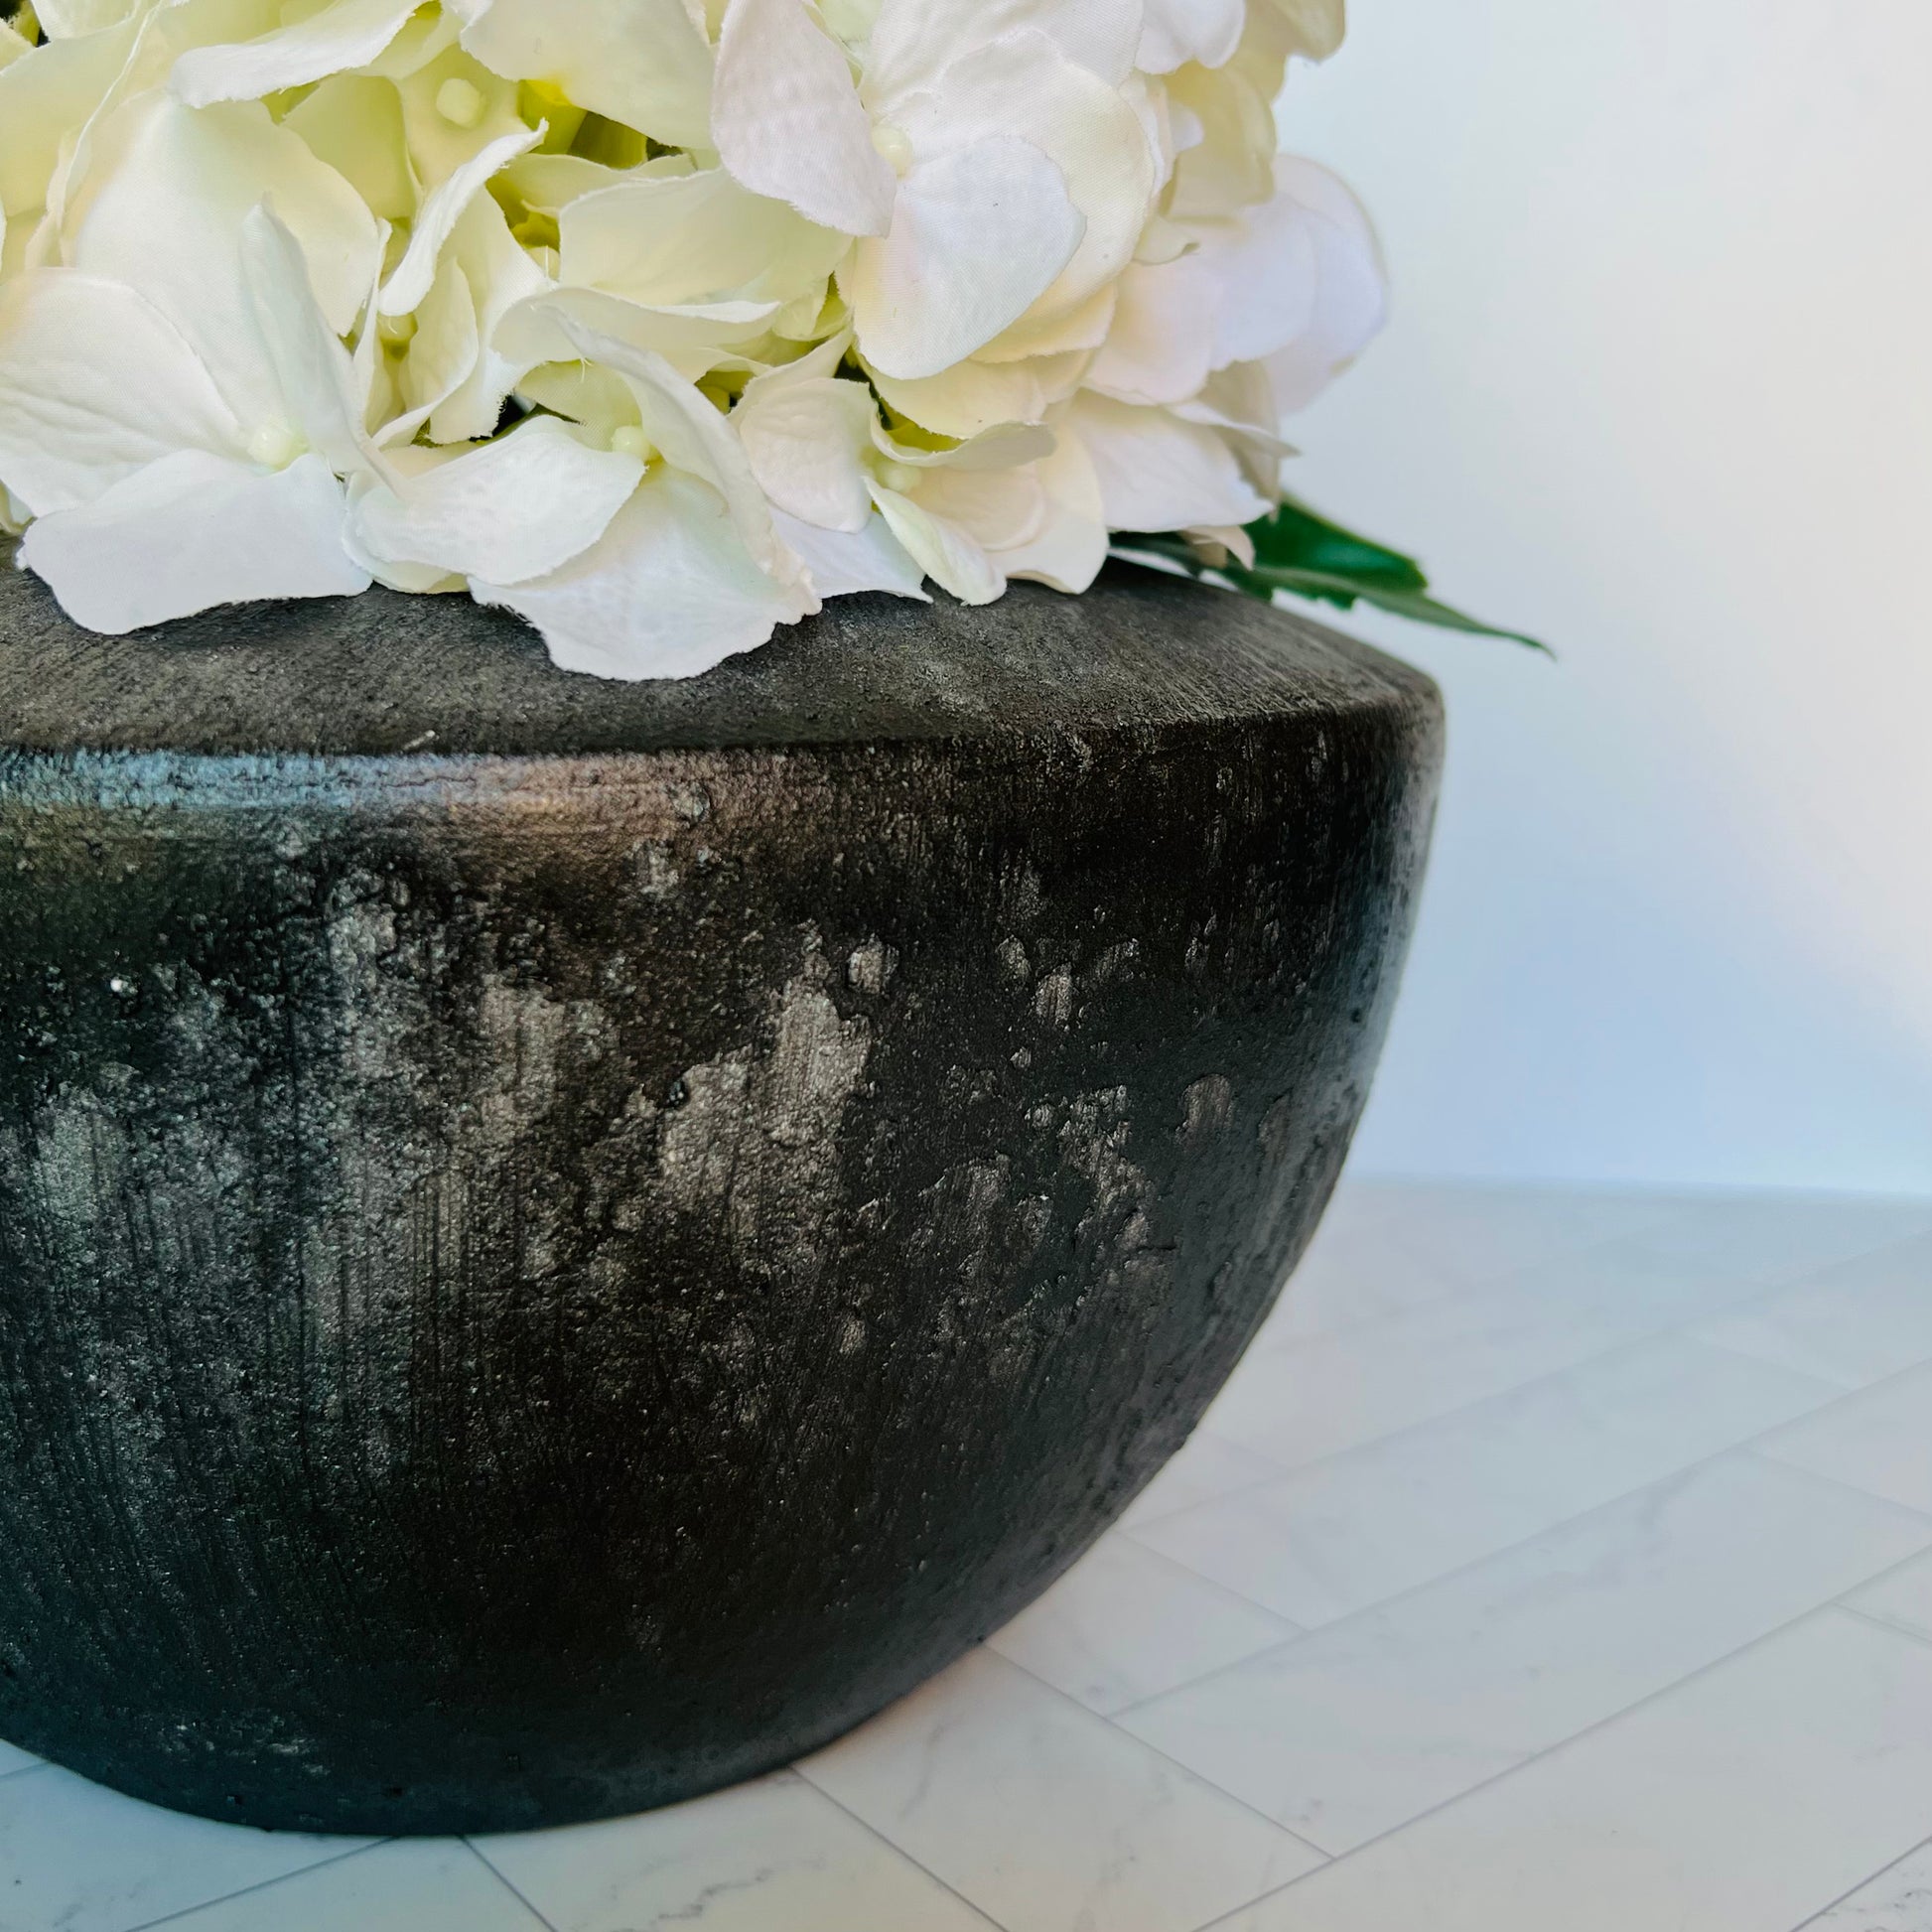 The Patina Planter shown up close and filled with hydrangea blossoms